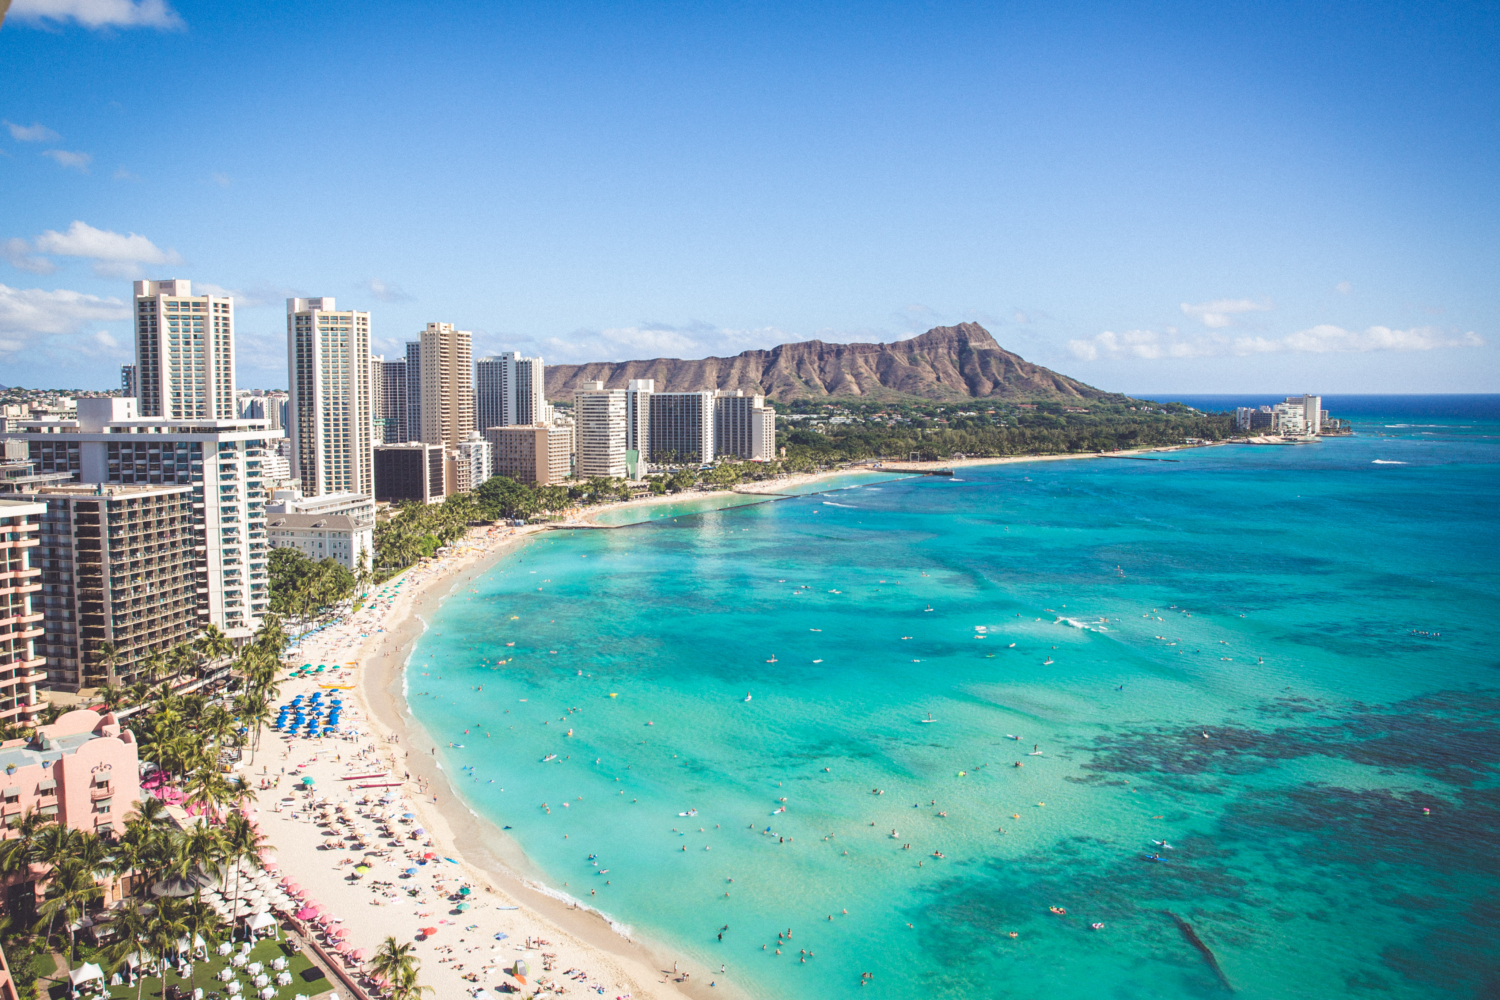 Waikiki beach in Oahu hawaii, best places for spring break for families